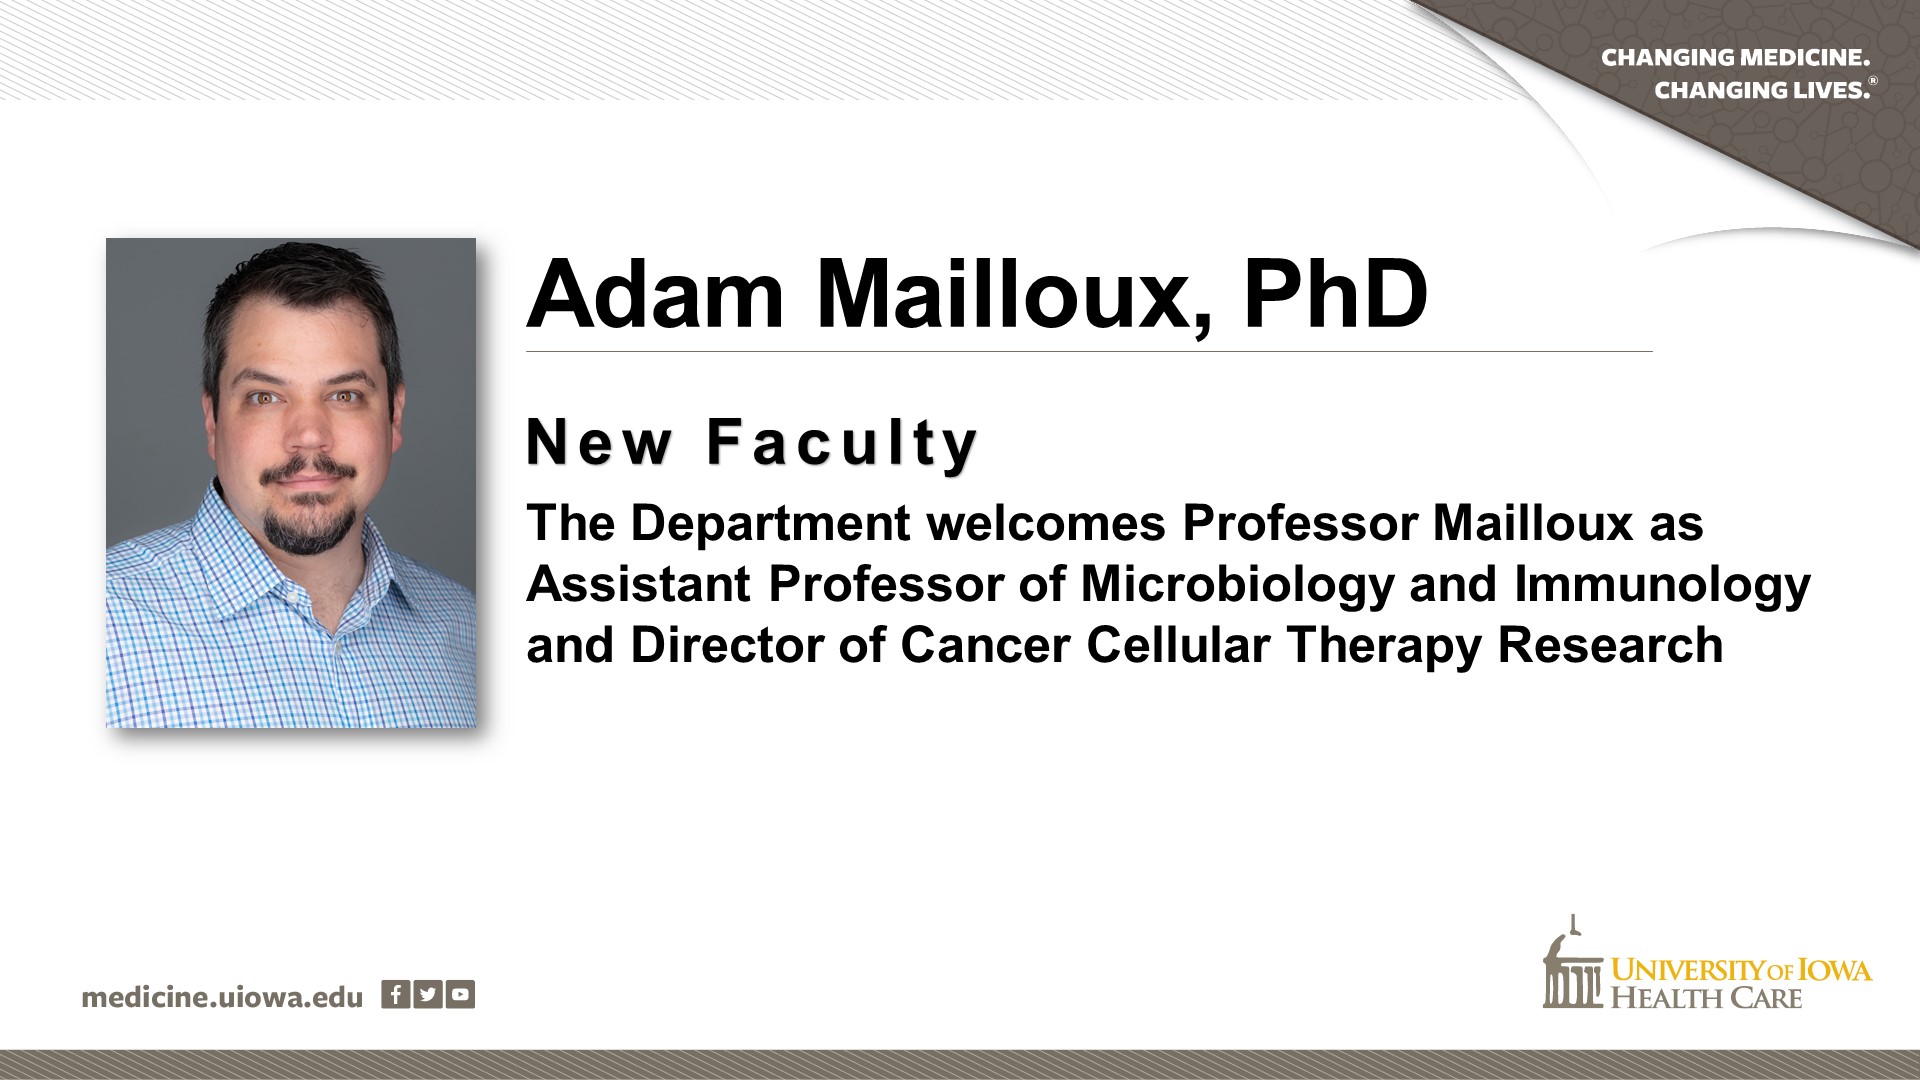 New Faculty Welcome - Adam Mailloux